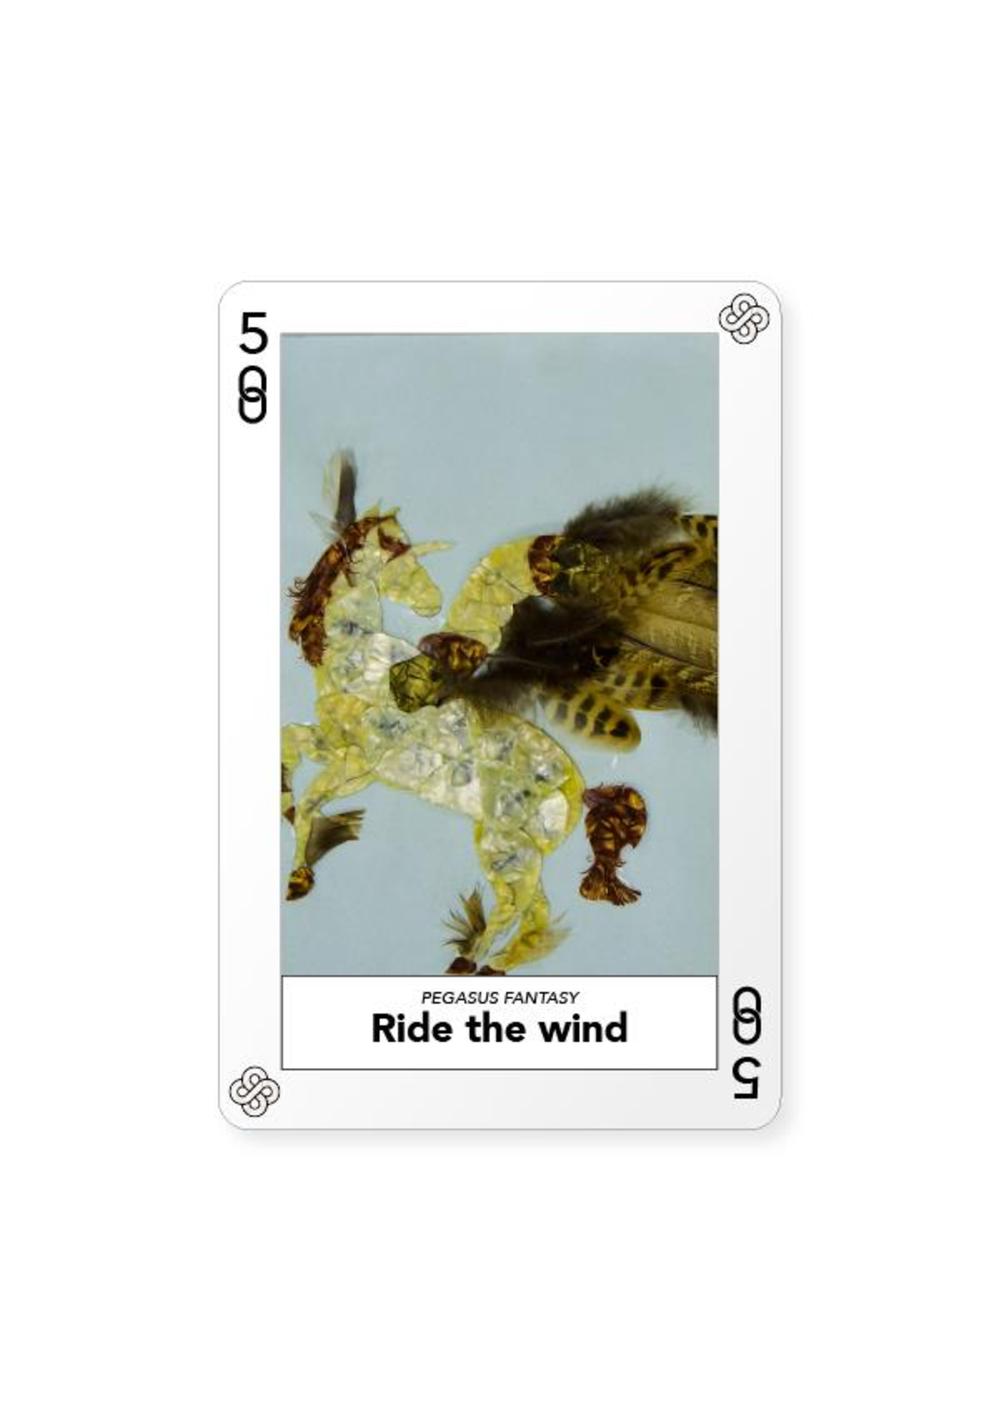 Certificate of Authenticity and Consignment - Ride the wind